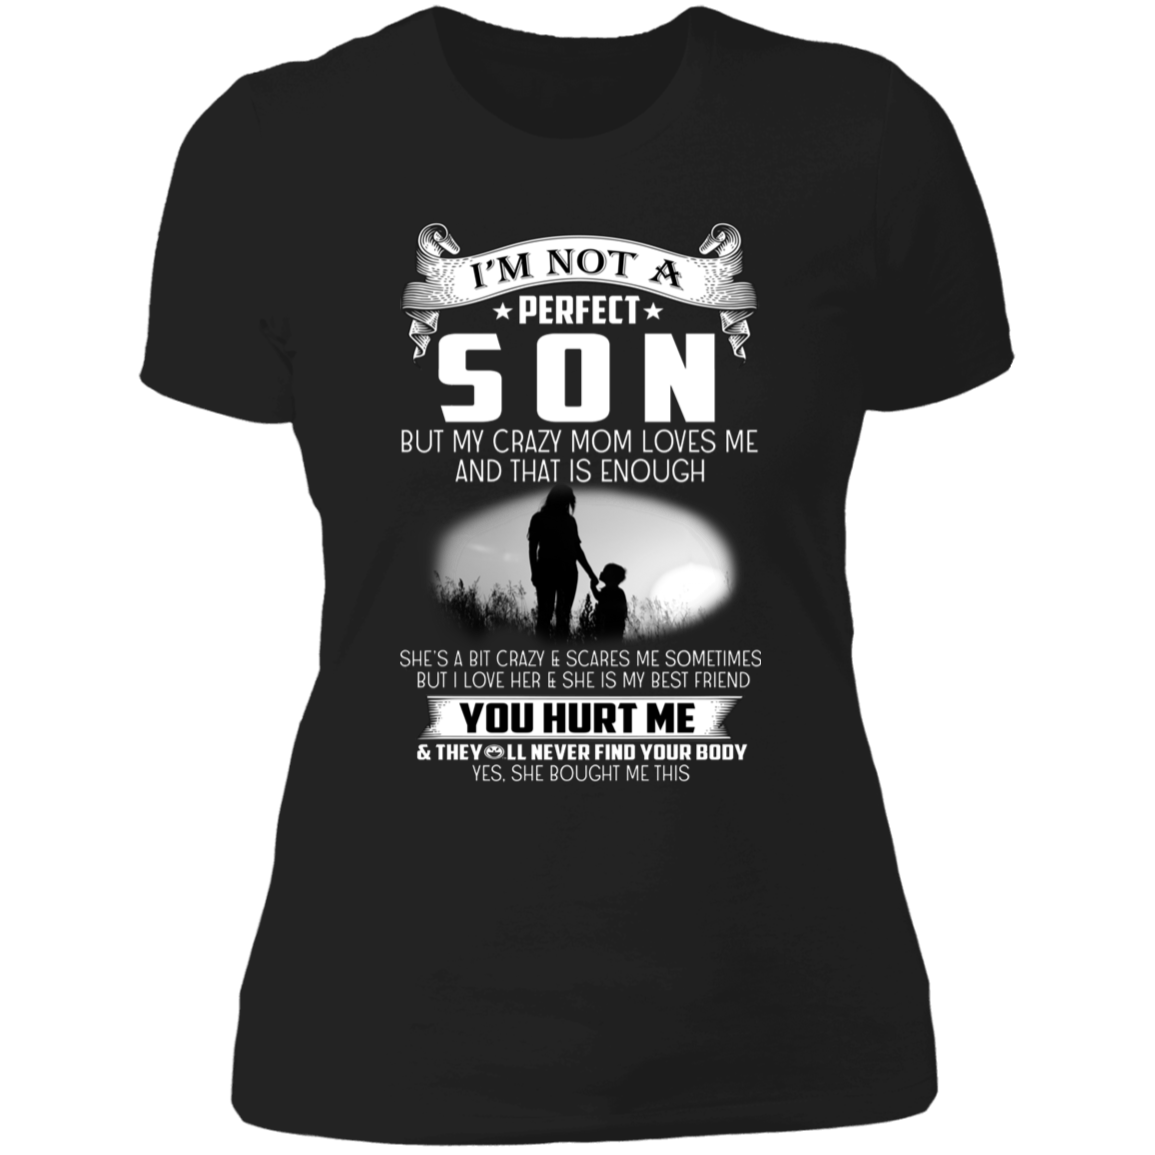 I'm Not A Perfect Son But My Crazy Mom Loves Me Unisex T-Shirt, Sweatshirt, Hoodie